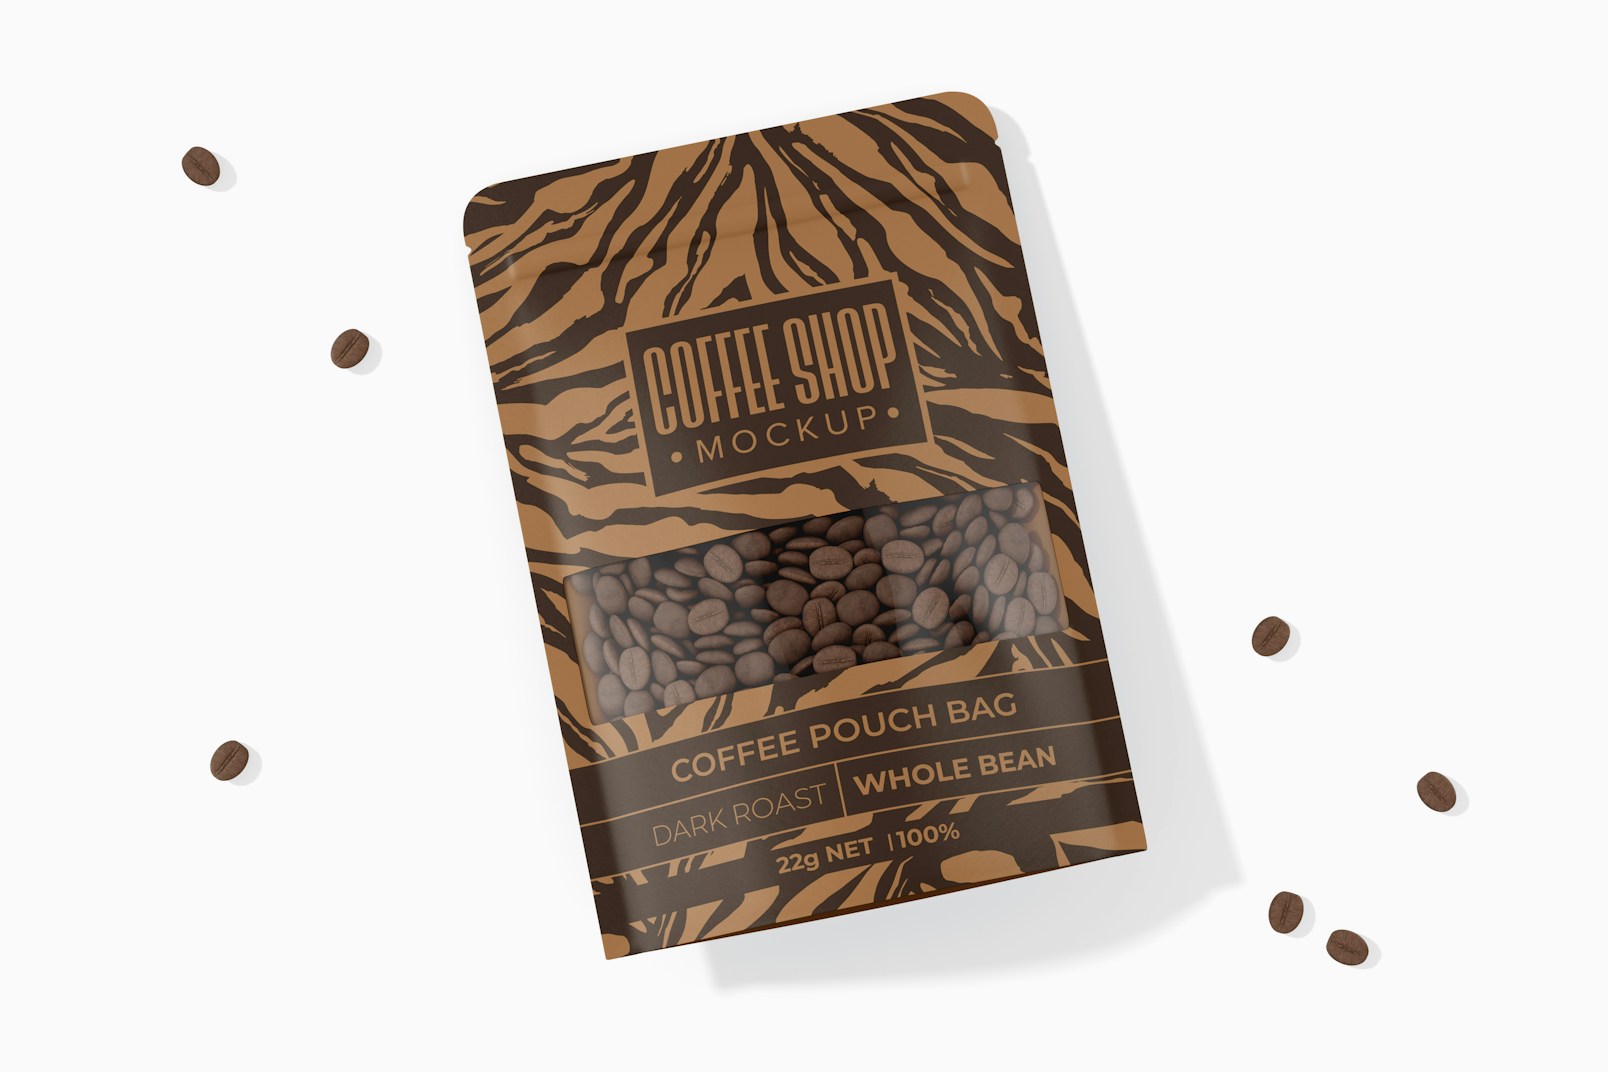 Coffee Pouch Bag Mockup, Top View